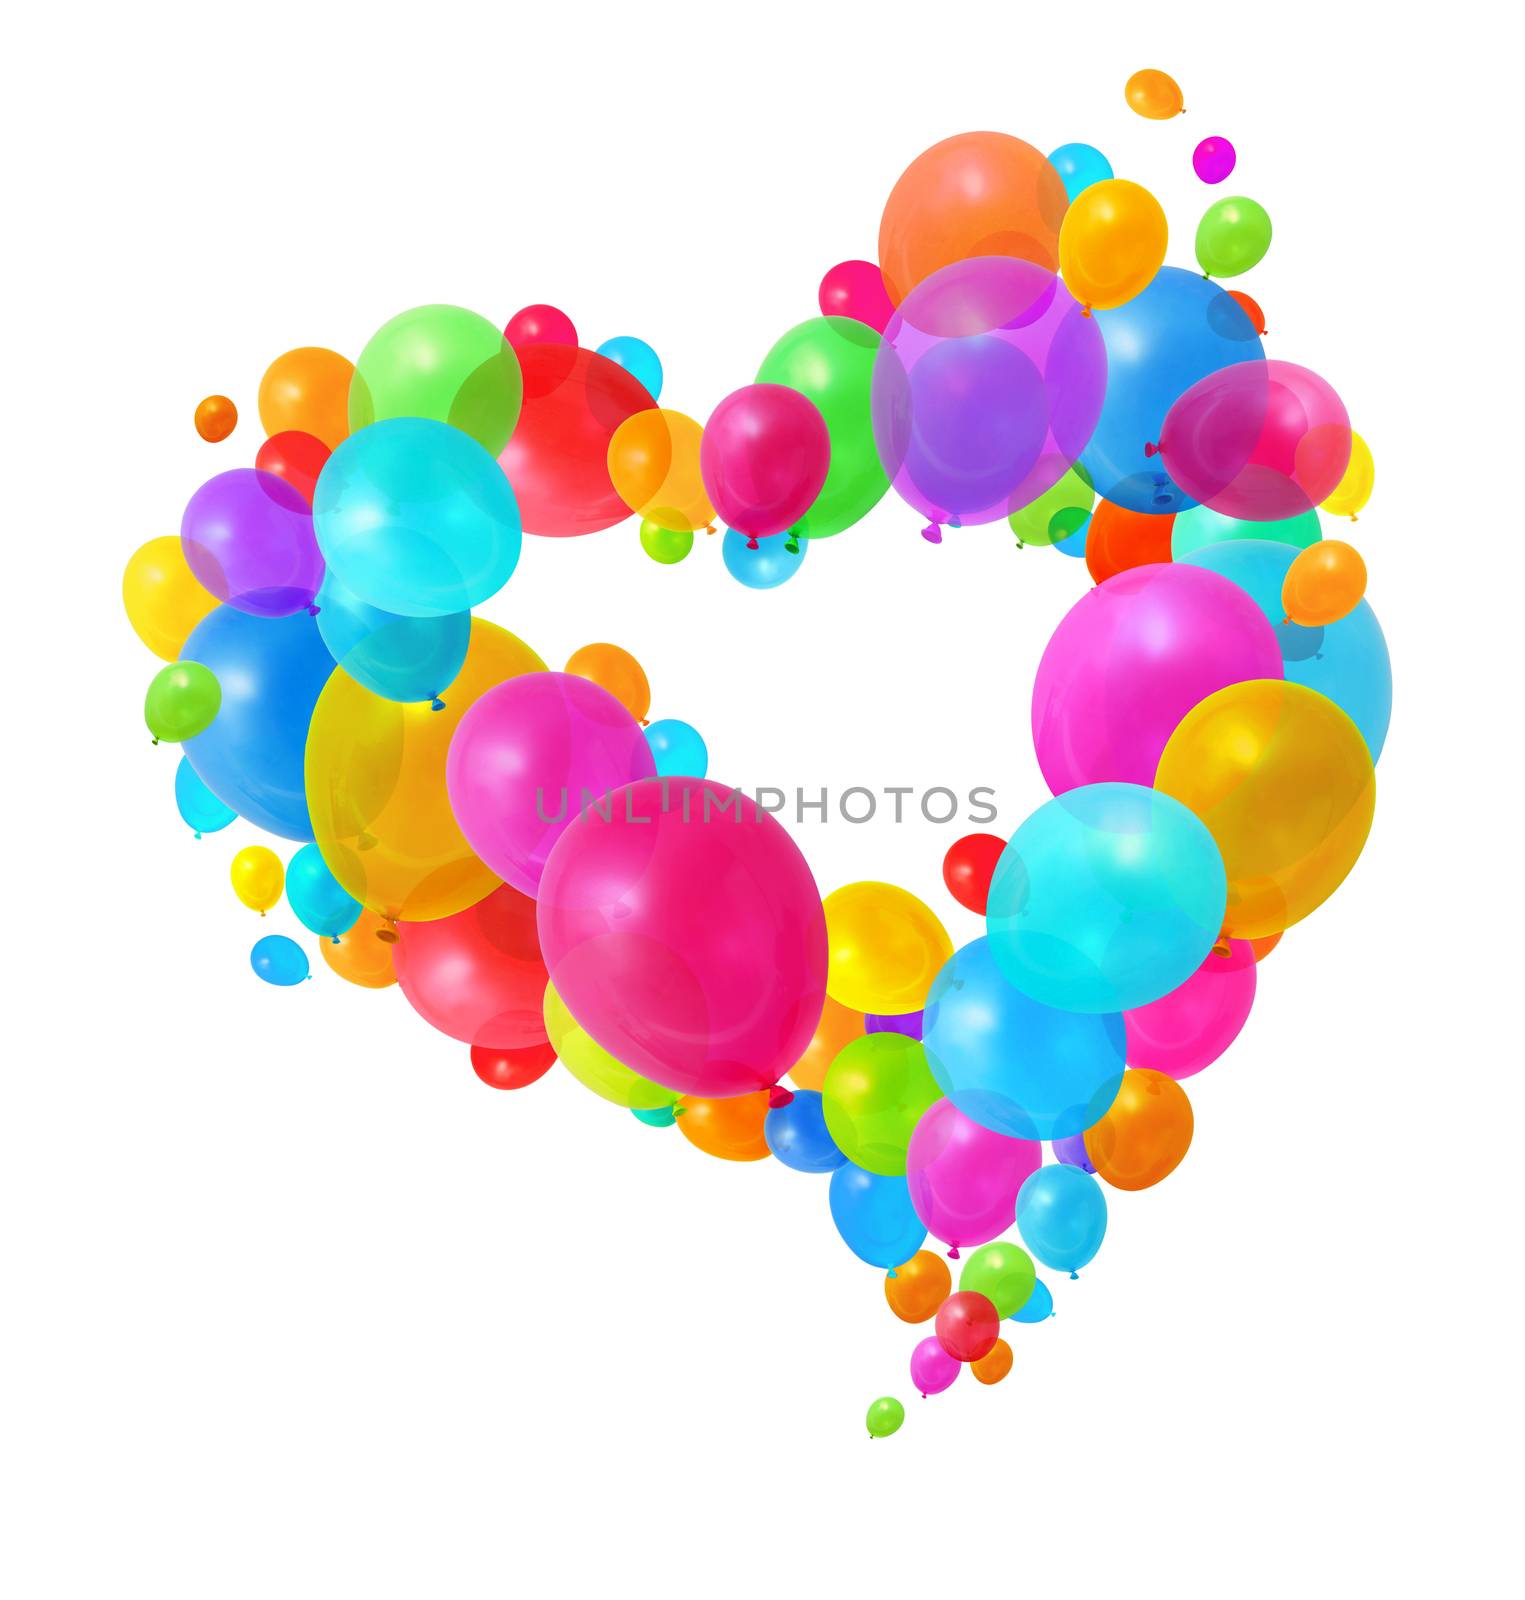 Colorful balloons flying in heart shape by anterovium